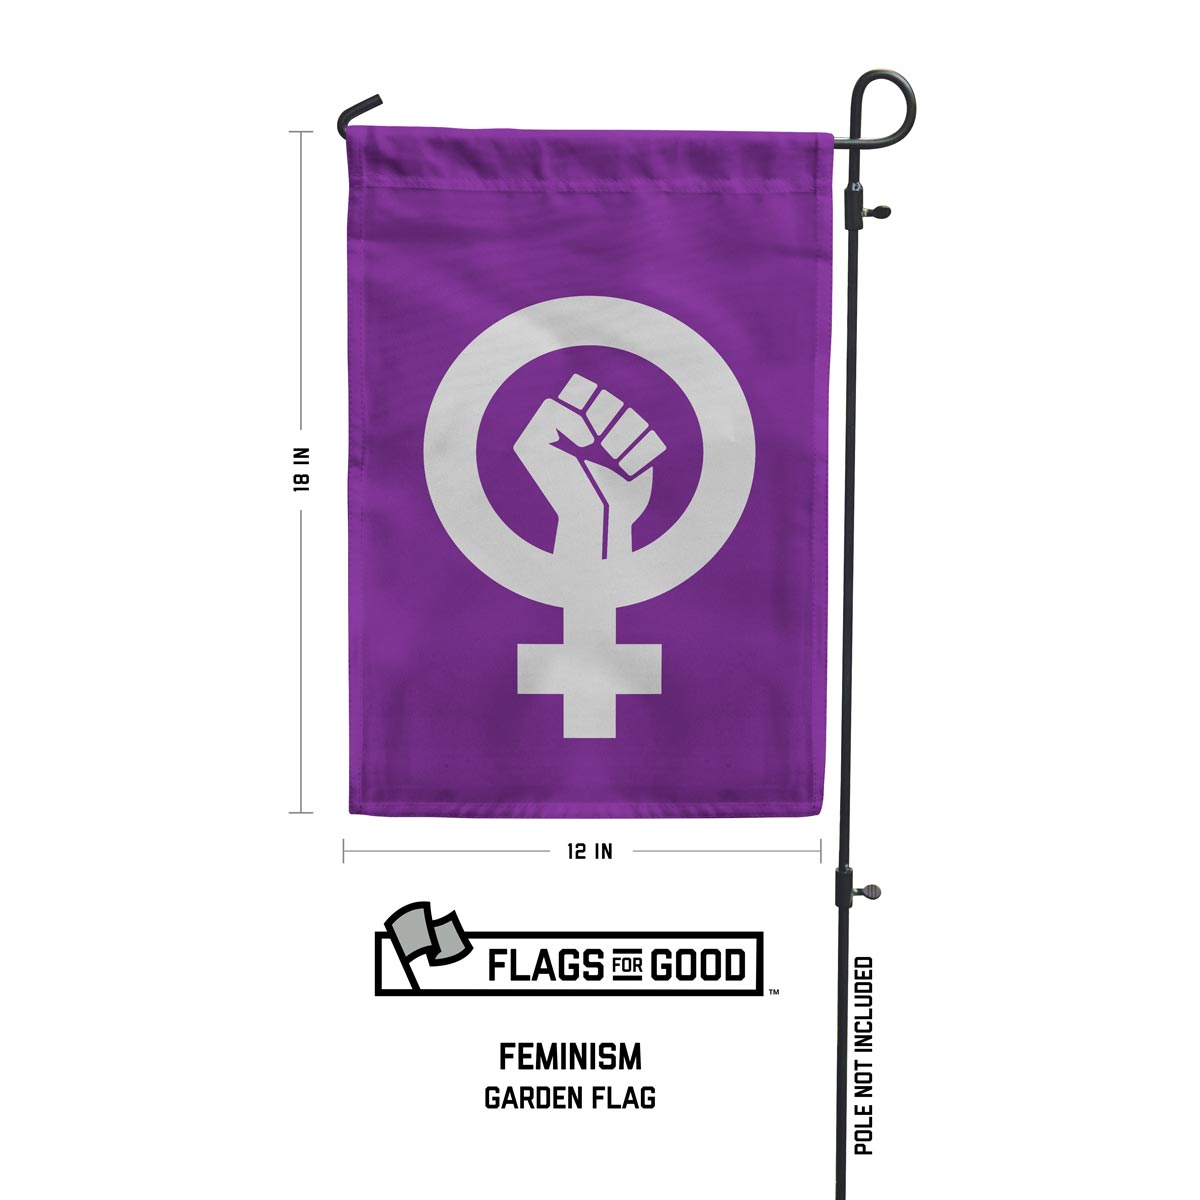 Feminism garden flag measuring 12 by 18 inches